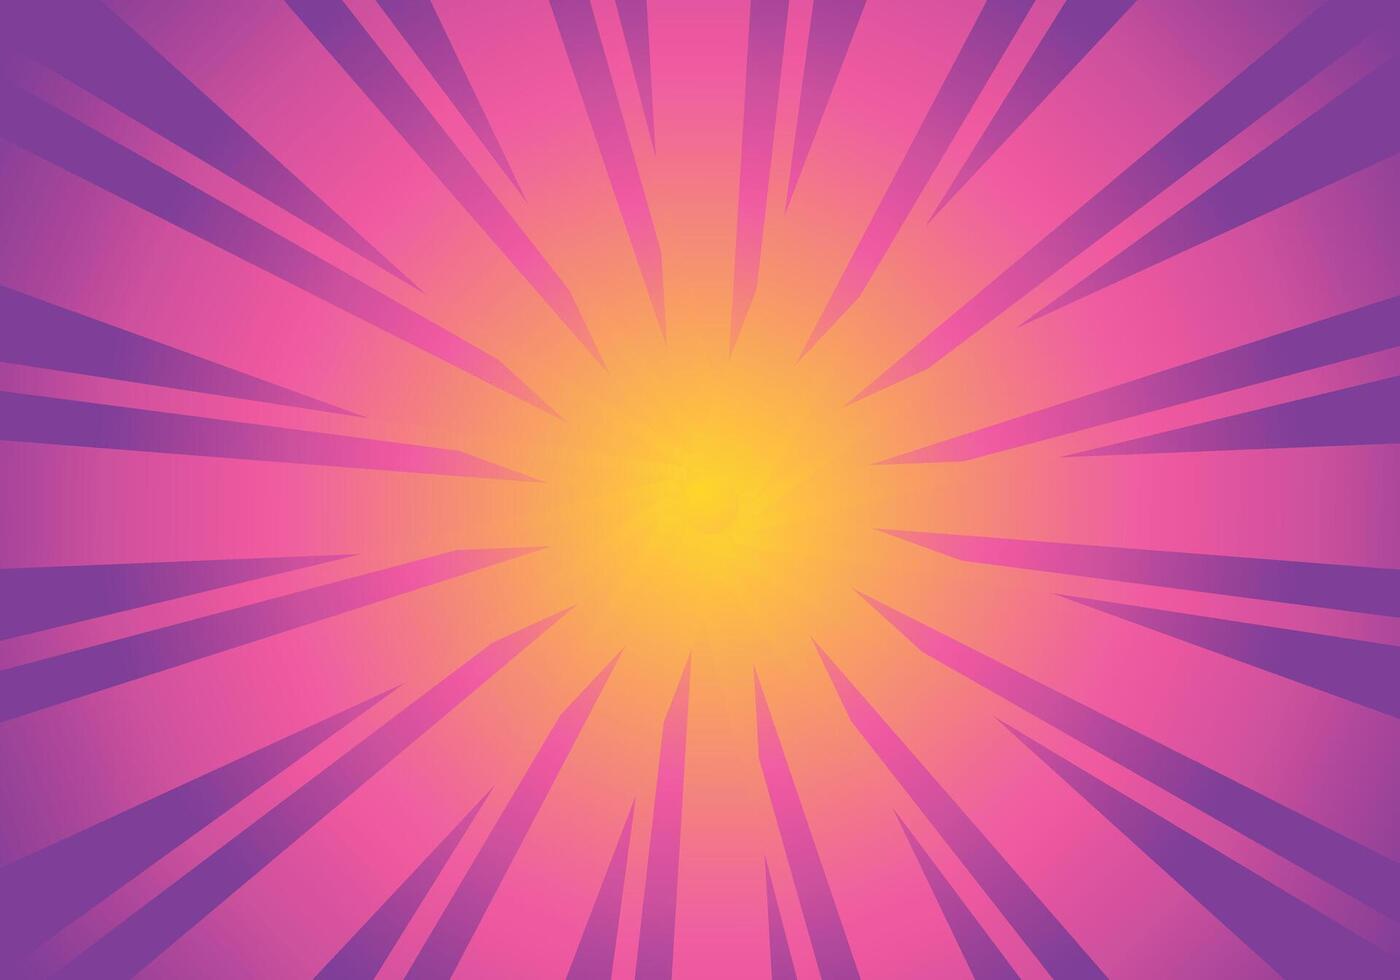 Sun ray sun burst gradient from purple to yellow color exploding. vector